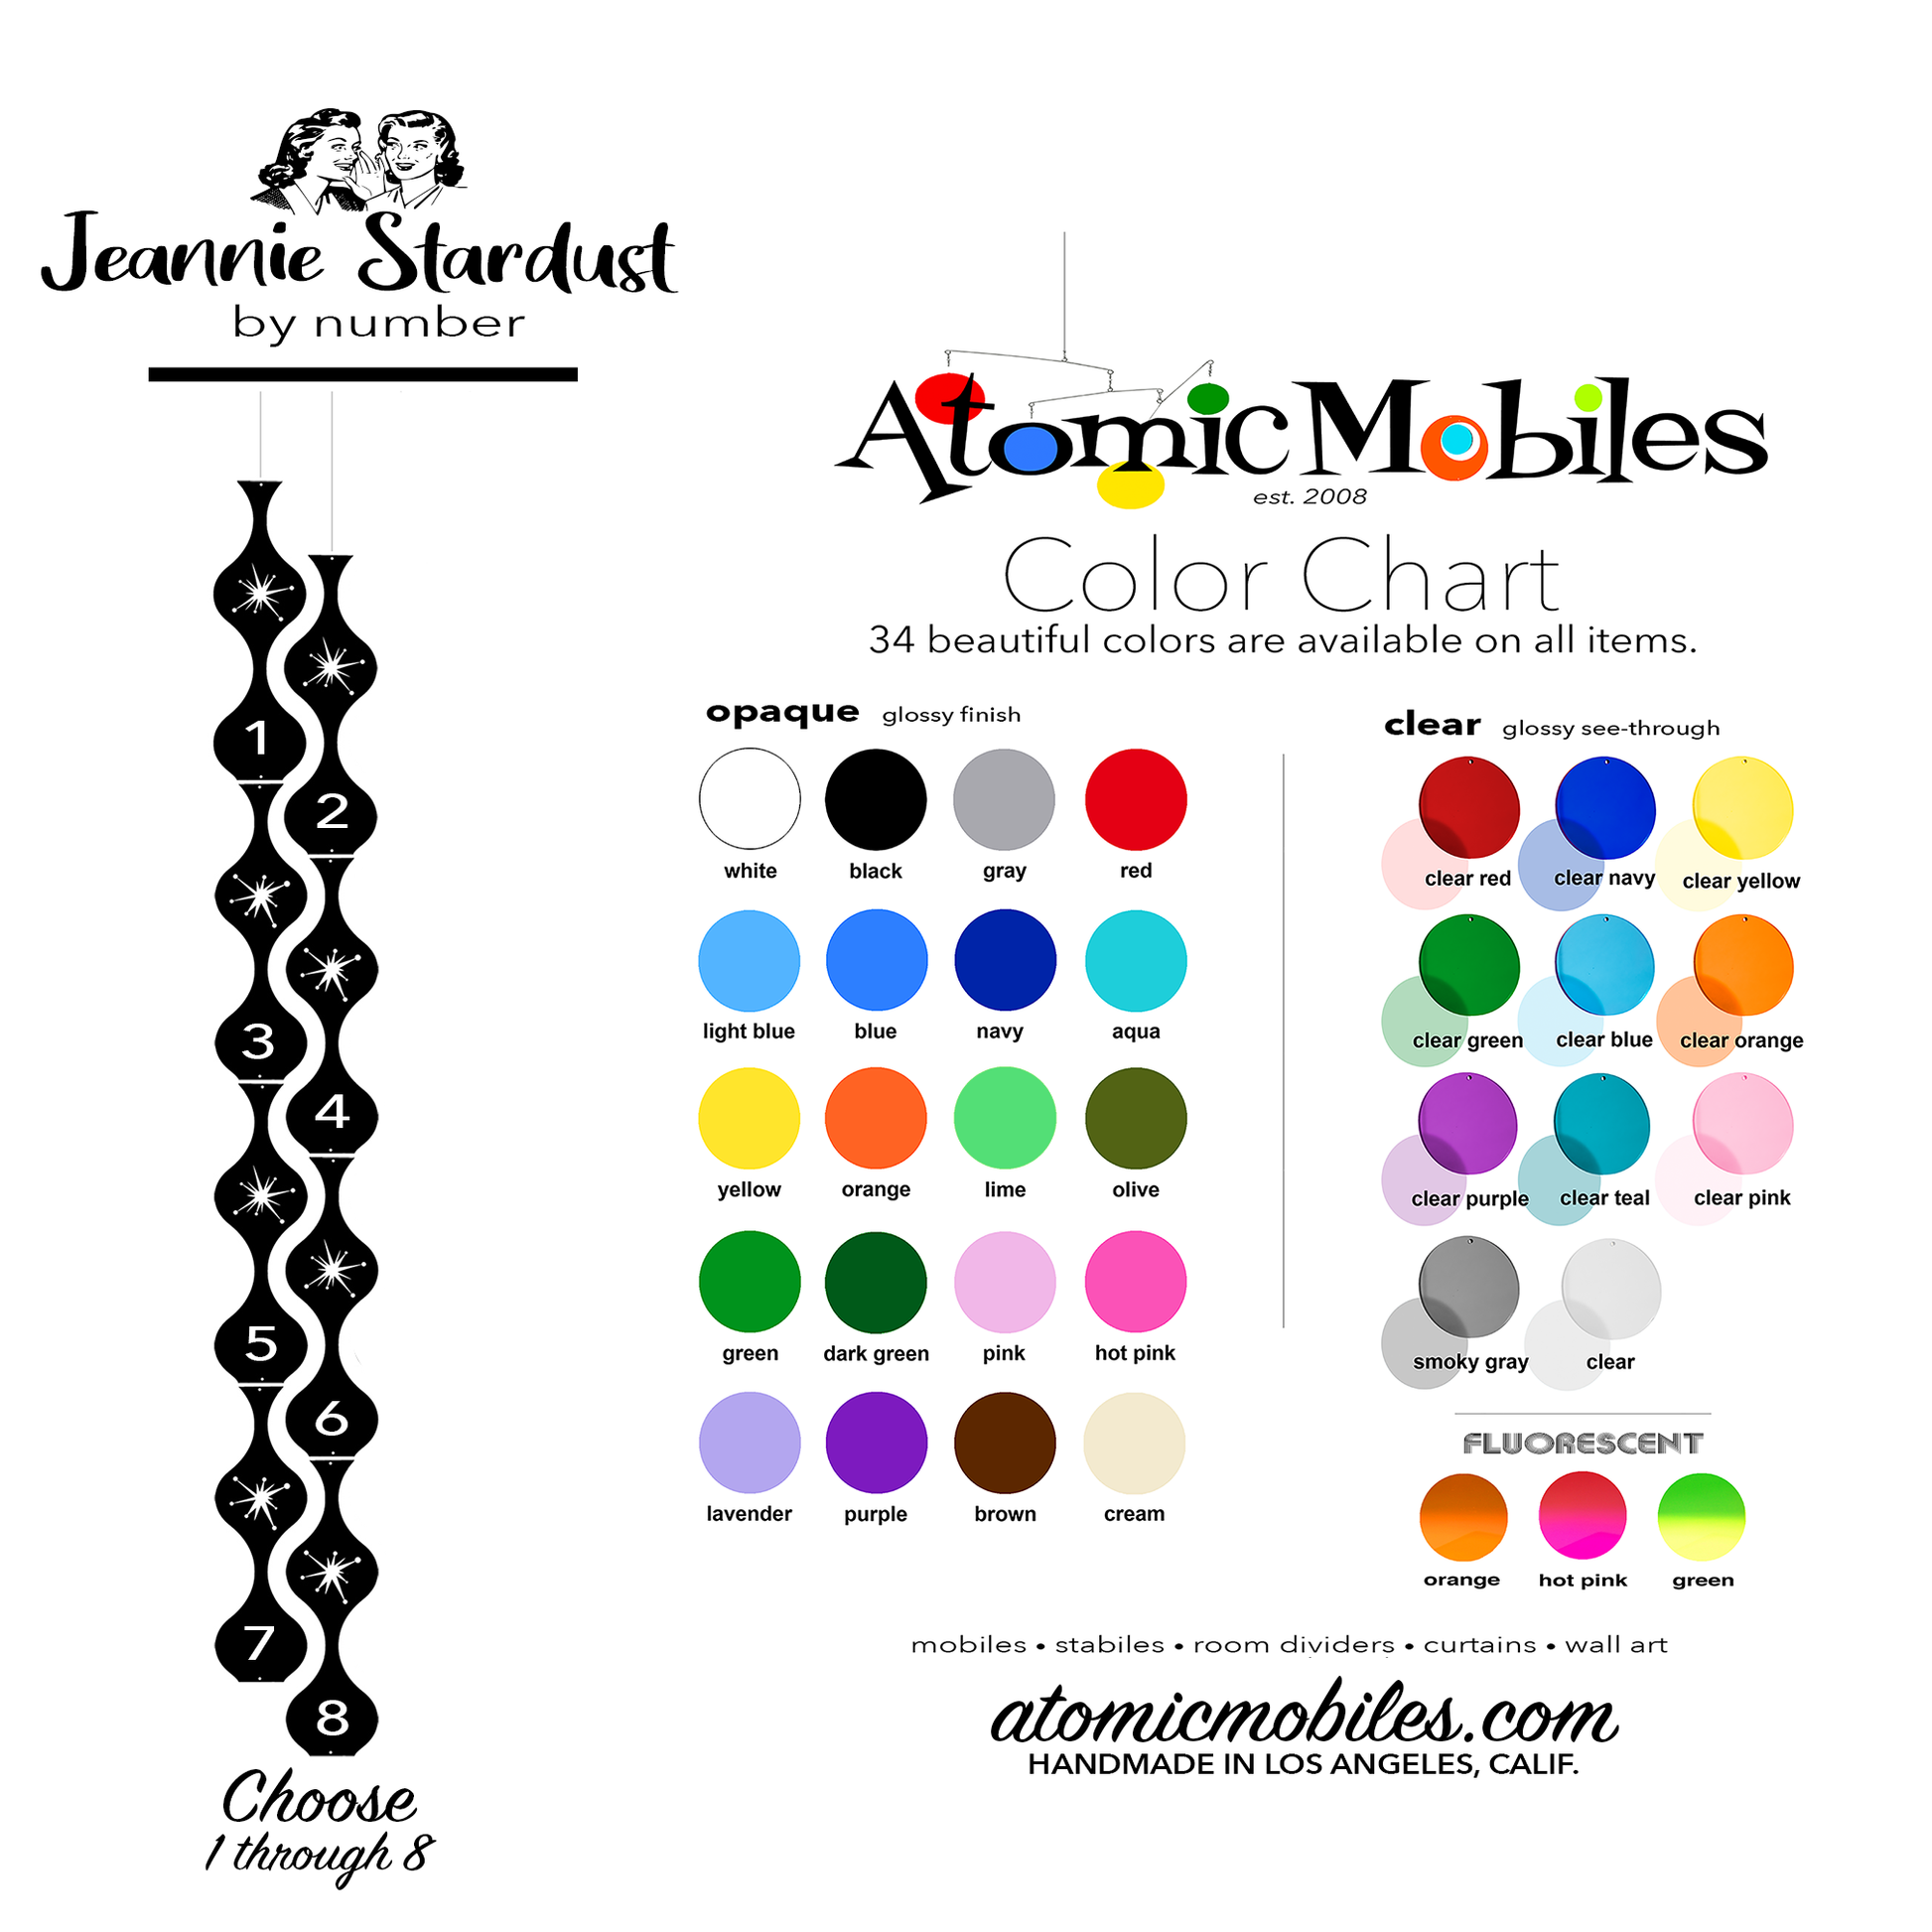 Jeannie Stardust Retro Mid Century Modern Mobiles Color Chart Half Order - 2 Columns - Choose your own colors - by AtomicMobiles.com